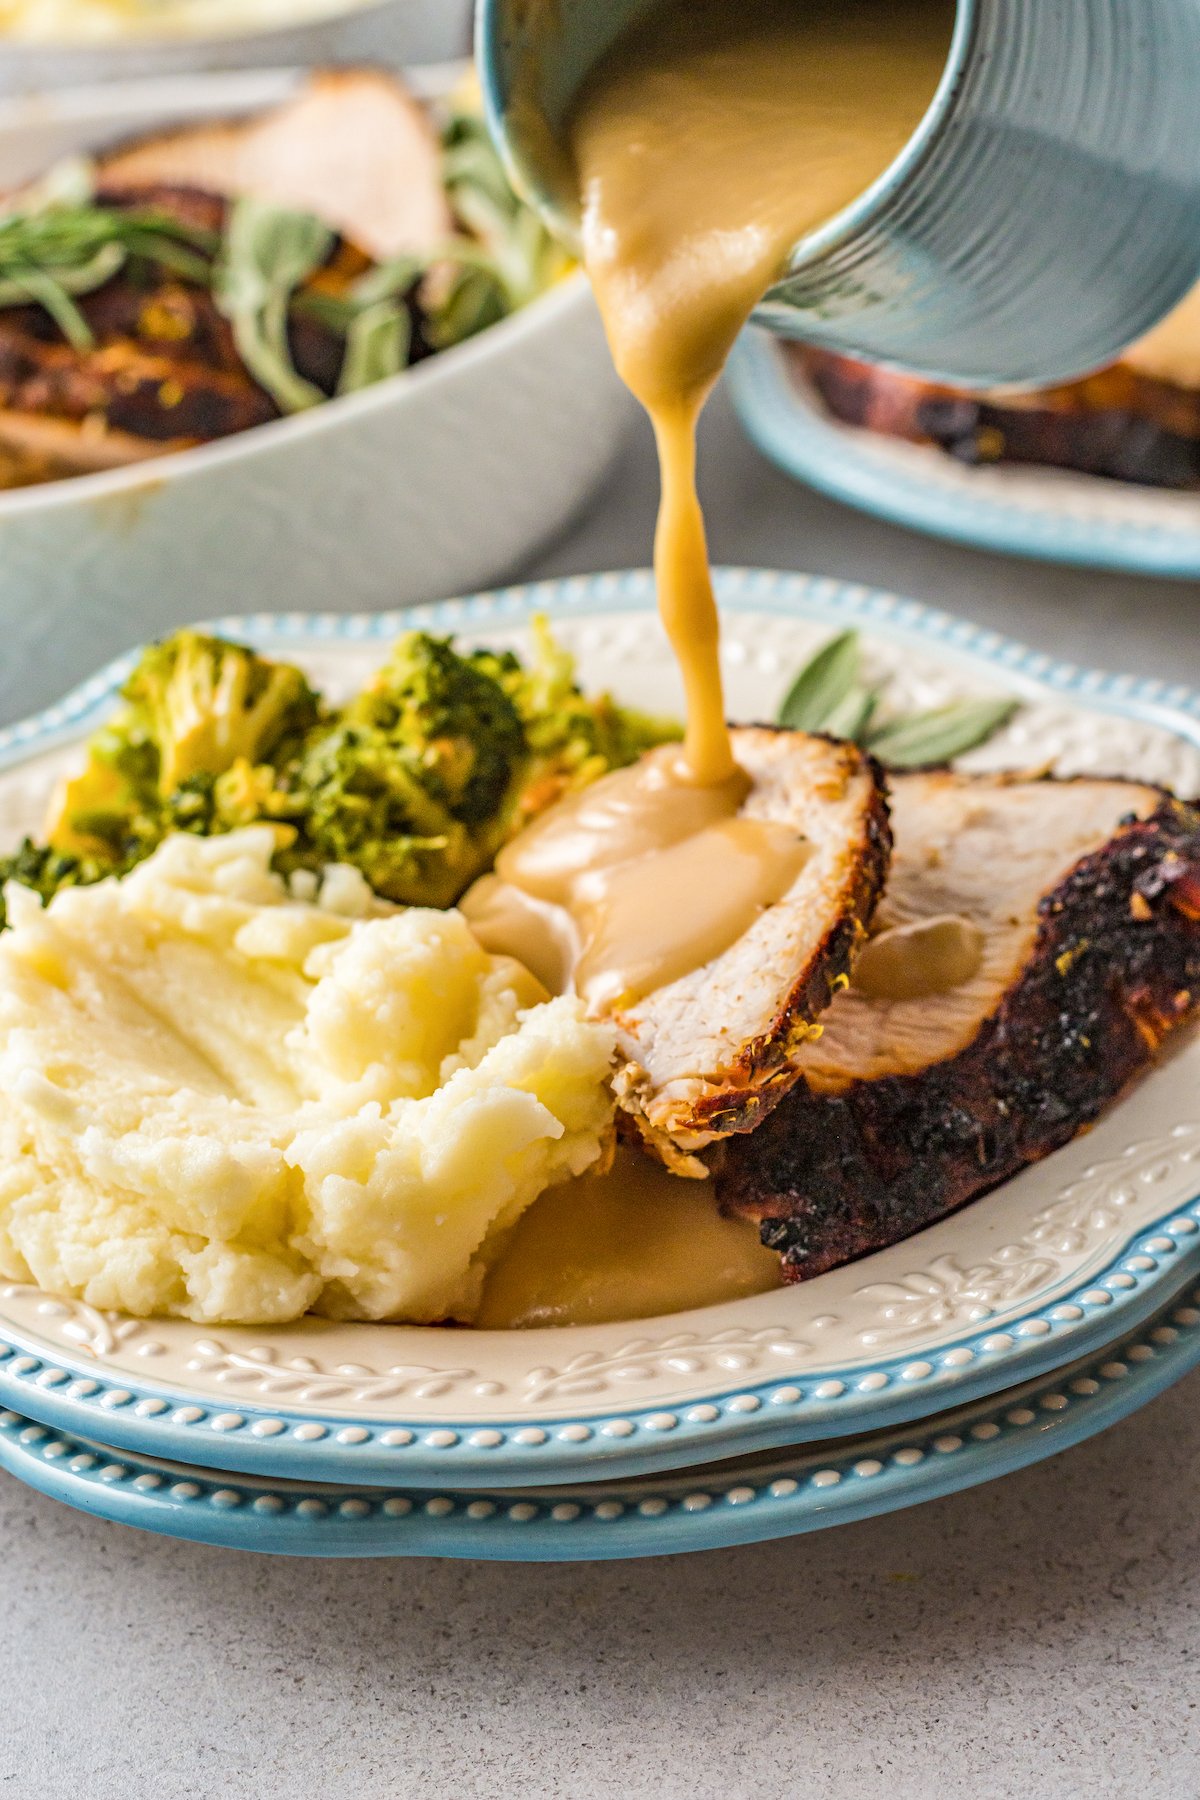 Gravy being poured over sliced turkey on a dinner plate with mashed potatoes and broccoli.